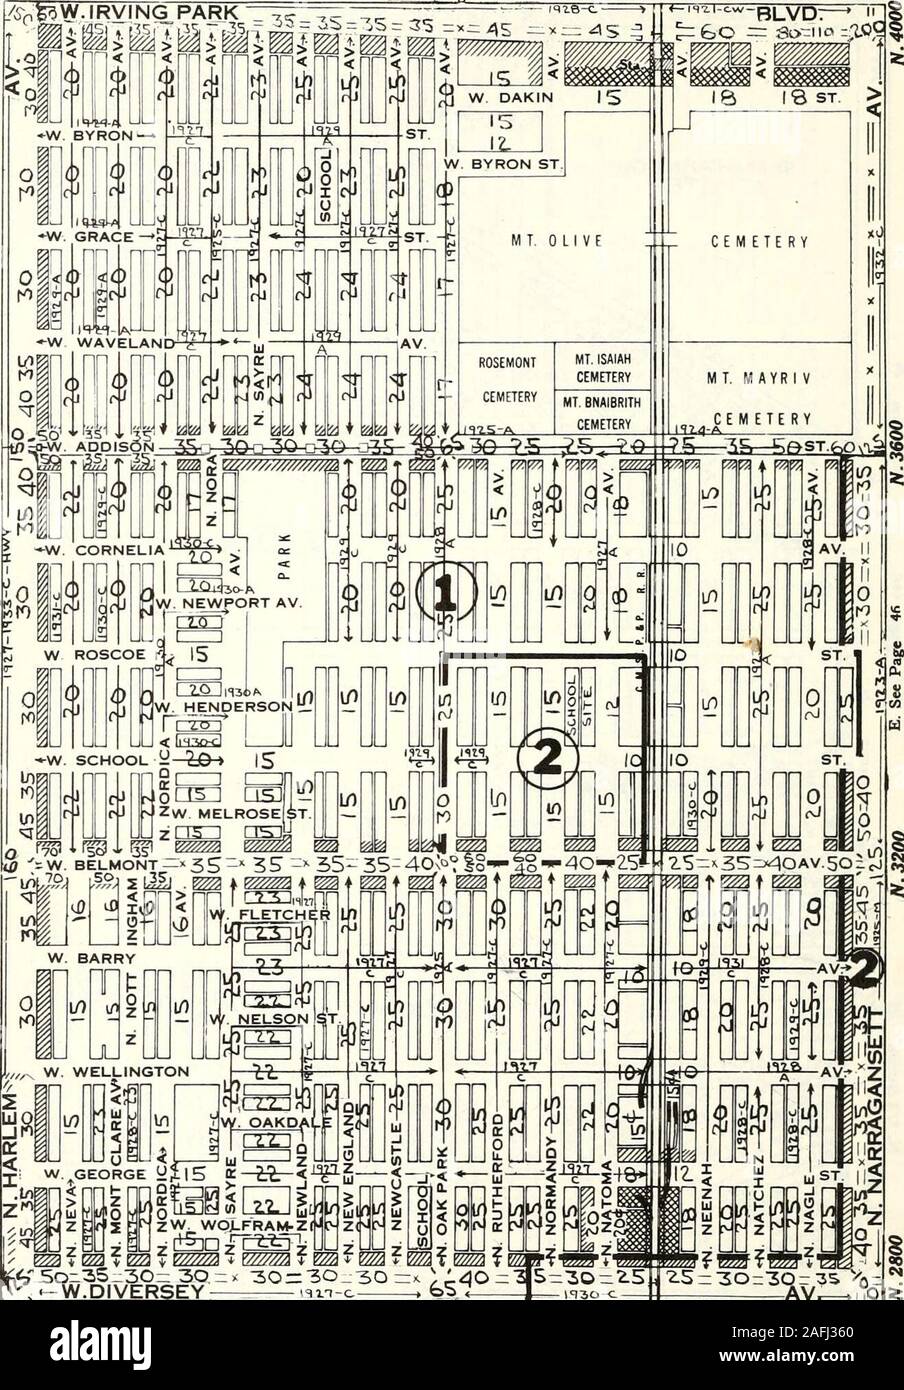 . Olcott's land values blue book of Chicago. blVERSEYELMWOOD PARK HOT ZOMED SUBJECT TO SEED RESTRICTIOHSAV. Q, 1*^ W.8000 S See Page ssaOOML SYMBOL DESIGHATES BOS- STS, iy//200 im-i Sec 24 Class 3-4-l£08t Vac-Not Pavad-Amer-i: Pol NEi- Sec 24 Class 3-4-ll03t Vac-Aner i. Pol.SwI Sec 24 Class 3-4-ll03t Vac-Not Paved-Amer & Pol SKi Sec 24 Class S-4 Host Vac-Aner iSc PolHWi Sec 25 All Hew Class 4-¥e8twood-Amer & Pol. HEi Sec 25 Class 3-4 Host Vac- 45 OLCOTTS LAND VALUES & ZONING 1936 T. 40 N—R. 13 E. N. See Page 36. ^ ZW. WOJLFRAM.Z(1 :SD- t ^ t ^ i W.DIVERSEY J GS . t^^^i W.7200 S. See Page 54 H Stock Photo